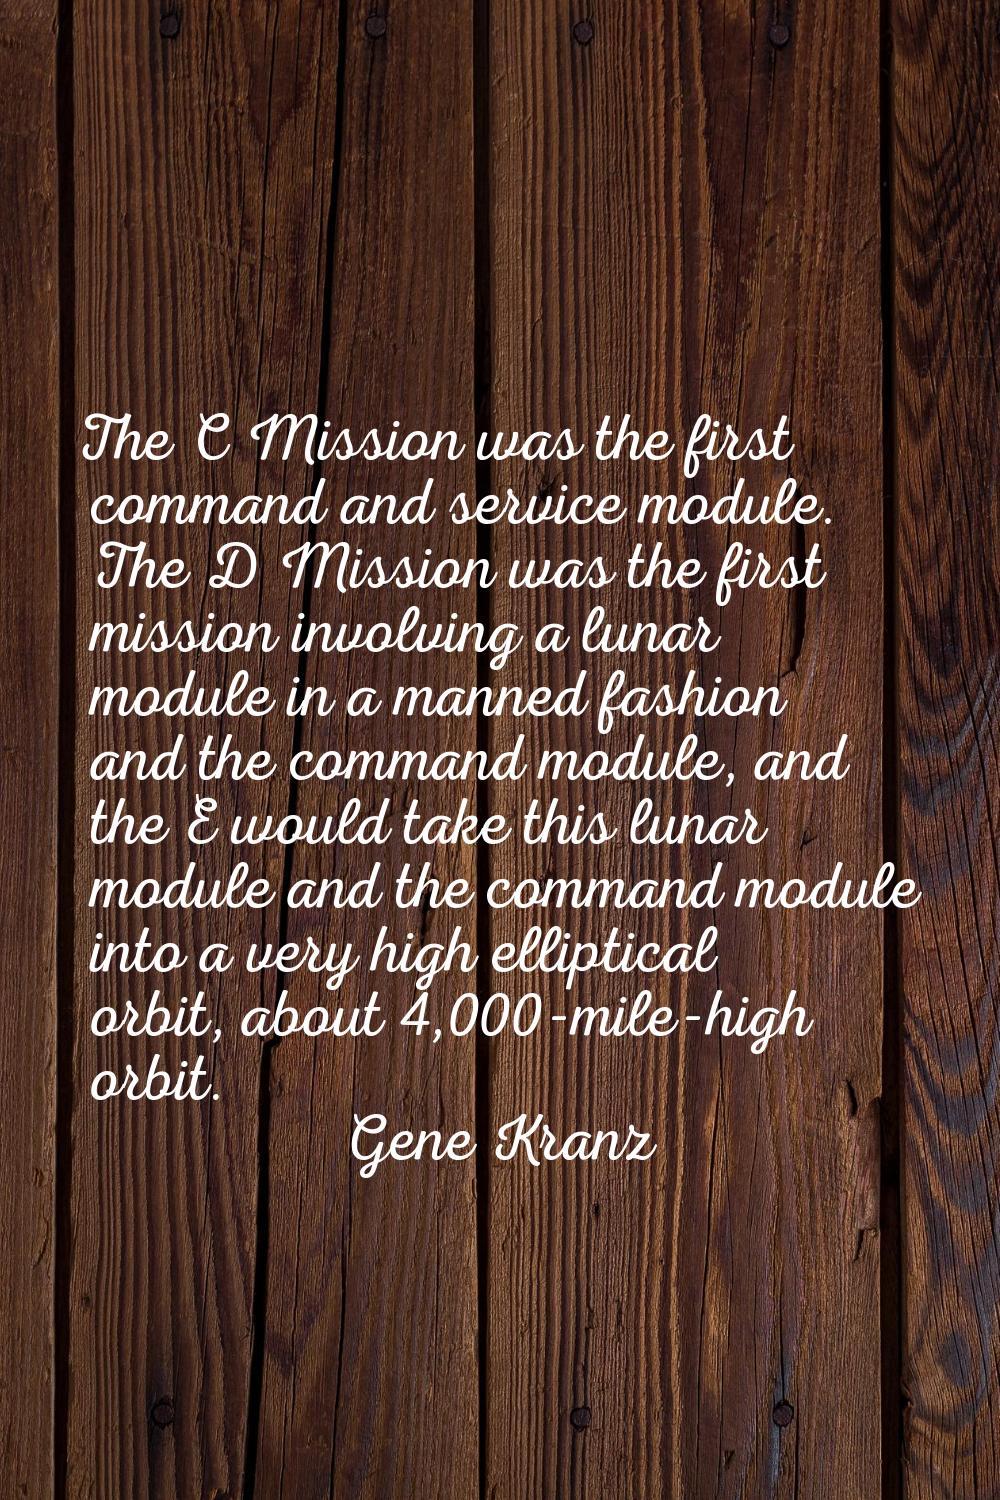 The C Mission was the first command and service module. The D Mission was the first mission involvi